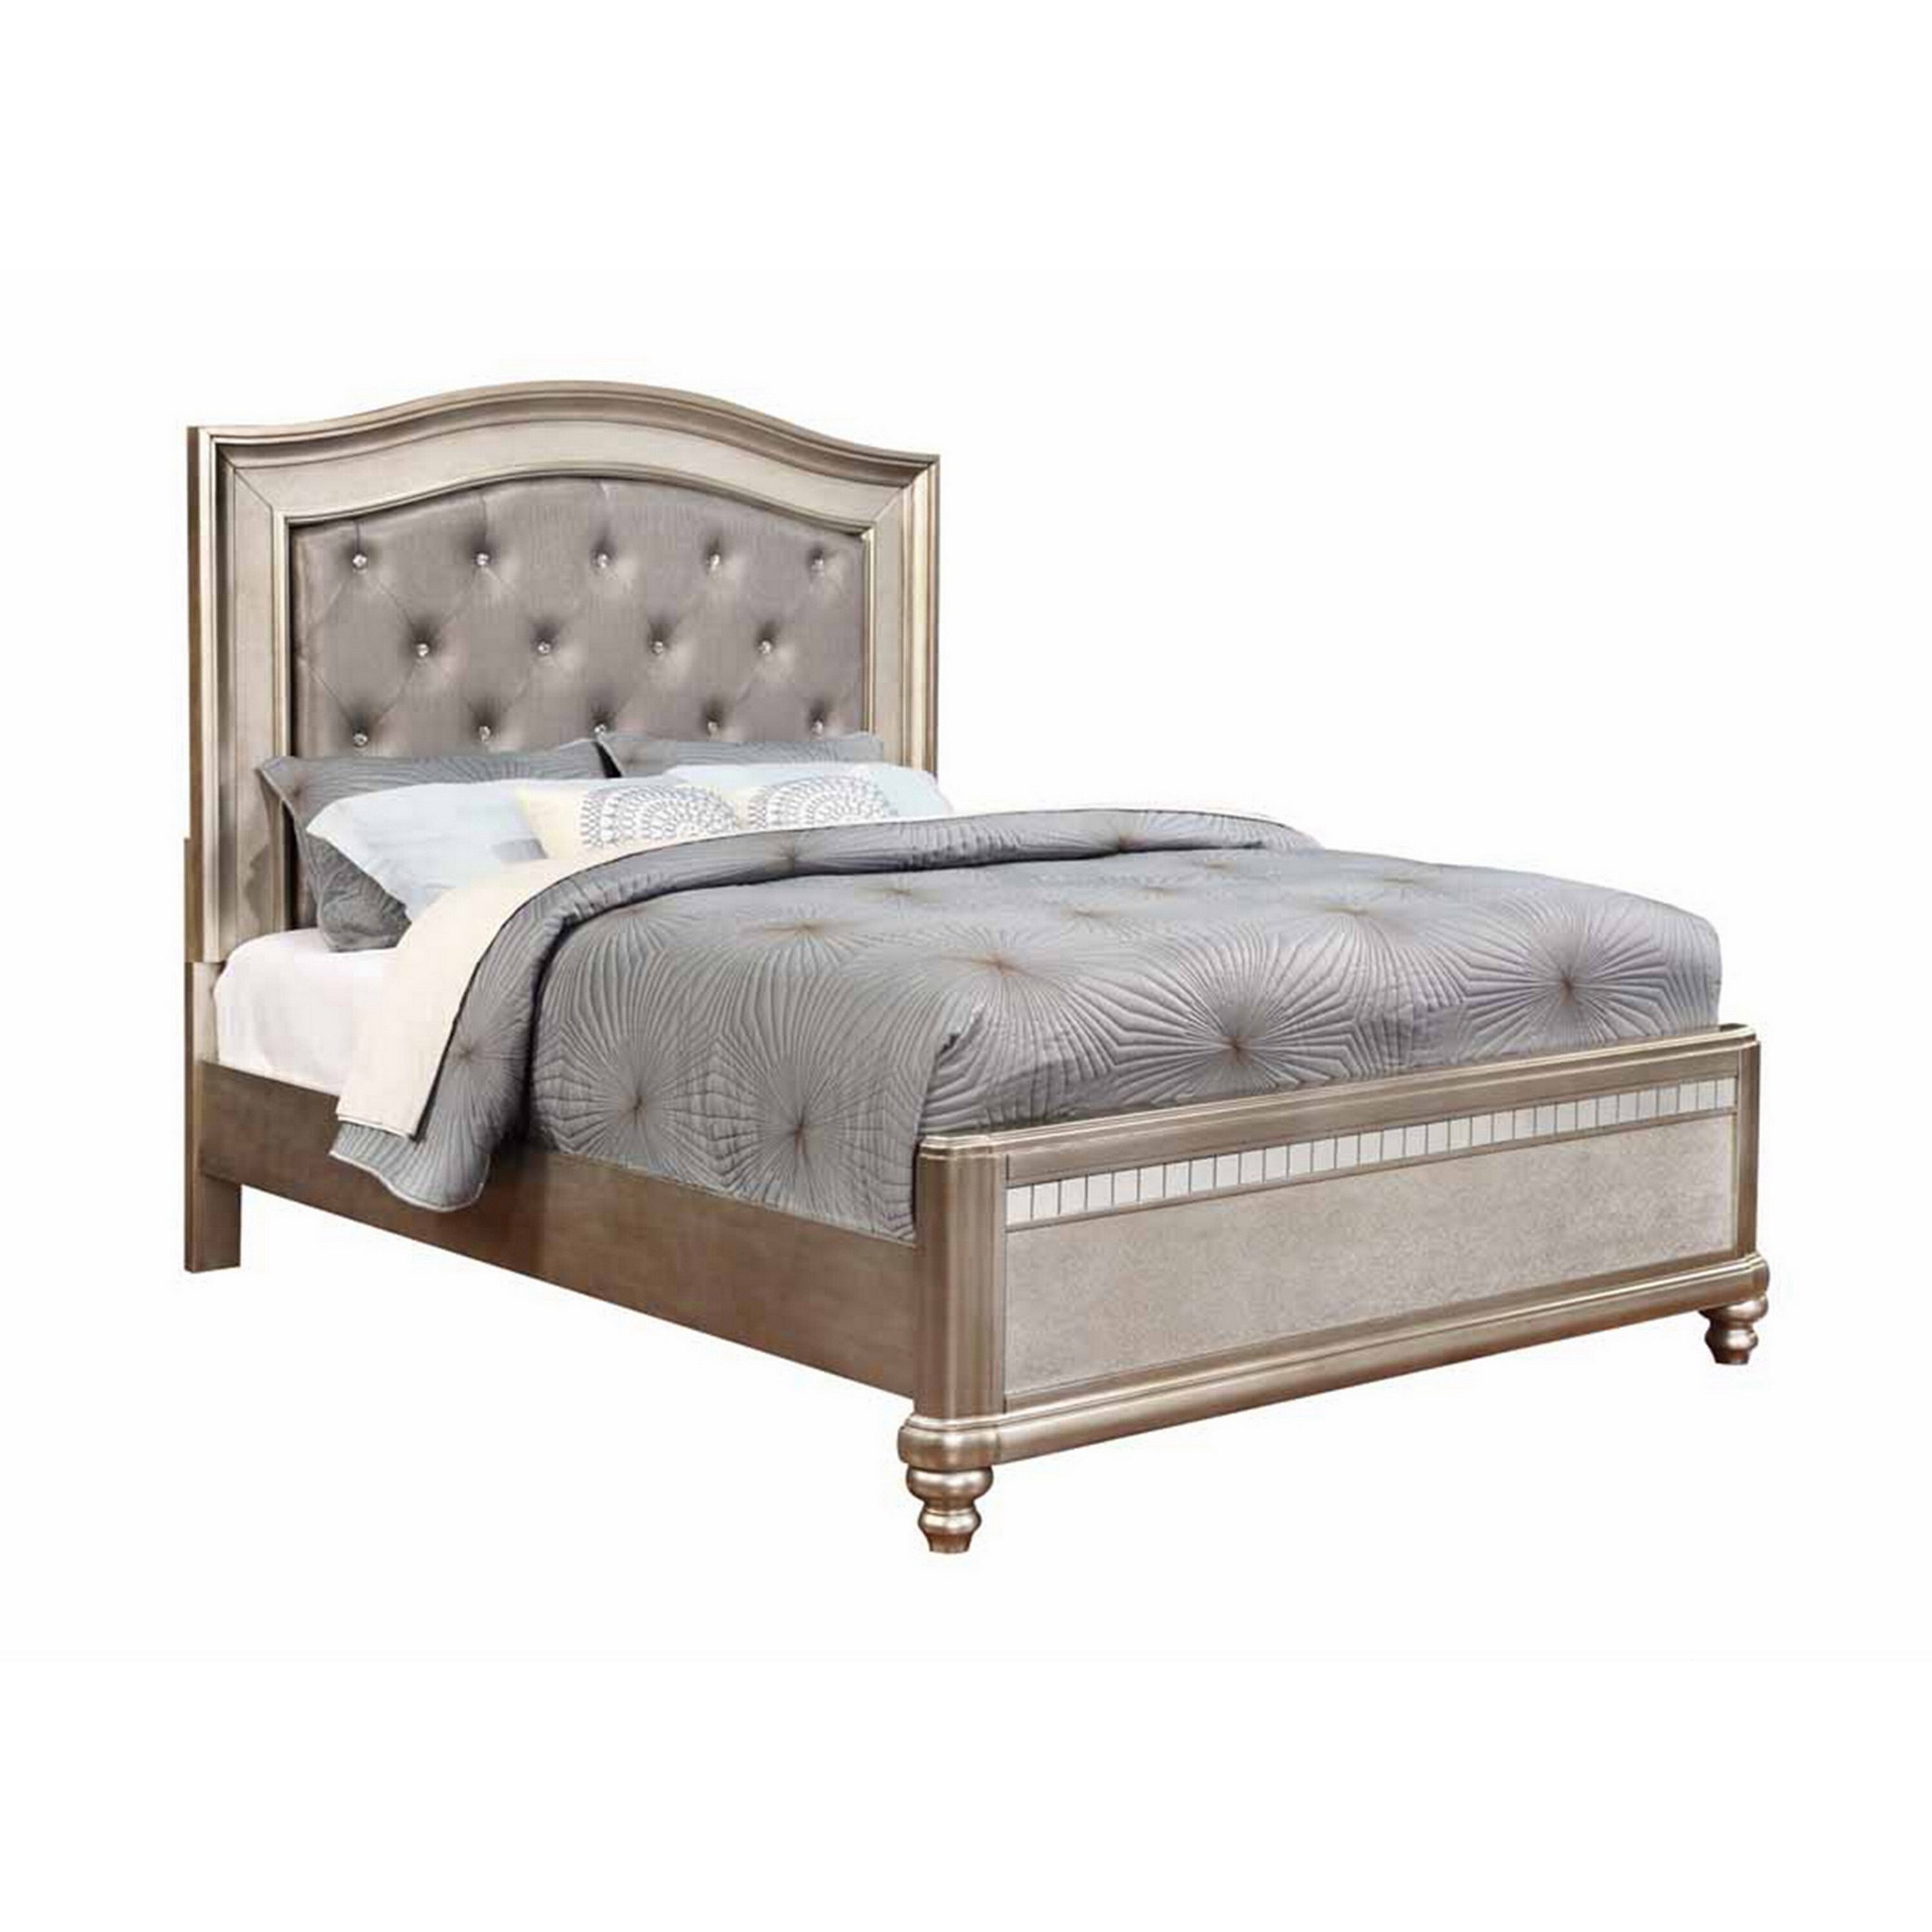 Deco Tufted Queen Bed in Metallic Finish, Mirrored Trim, Muted Gold, Silver